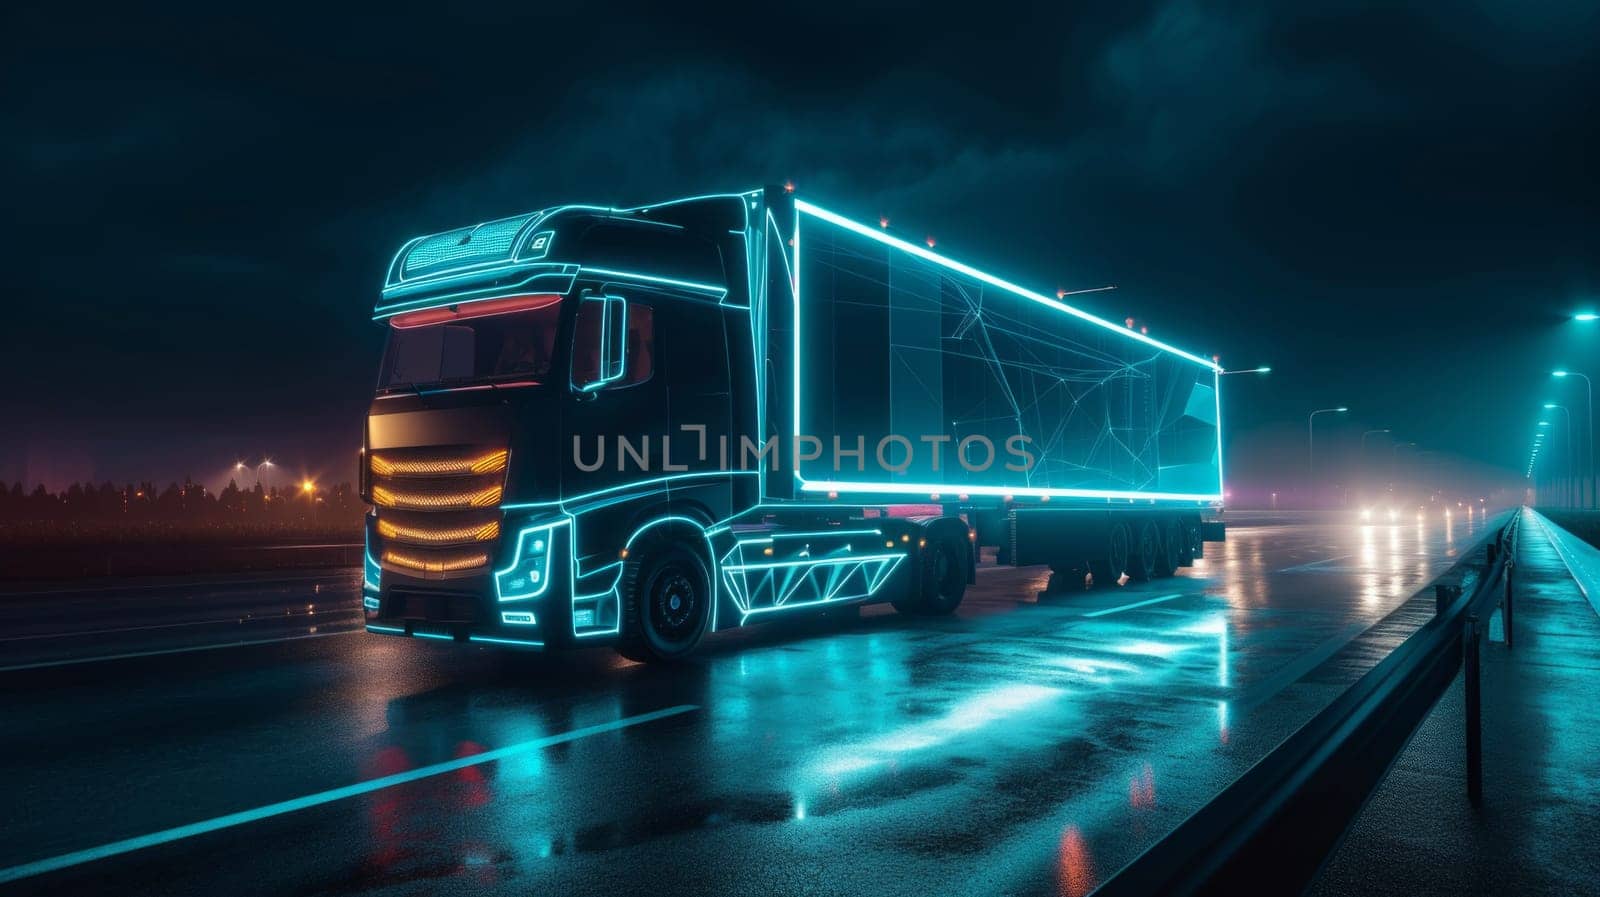 Futuristic cargo truck in blue lights on highway at night. Electric and sustainable transport concept.